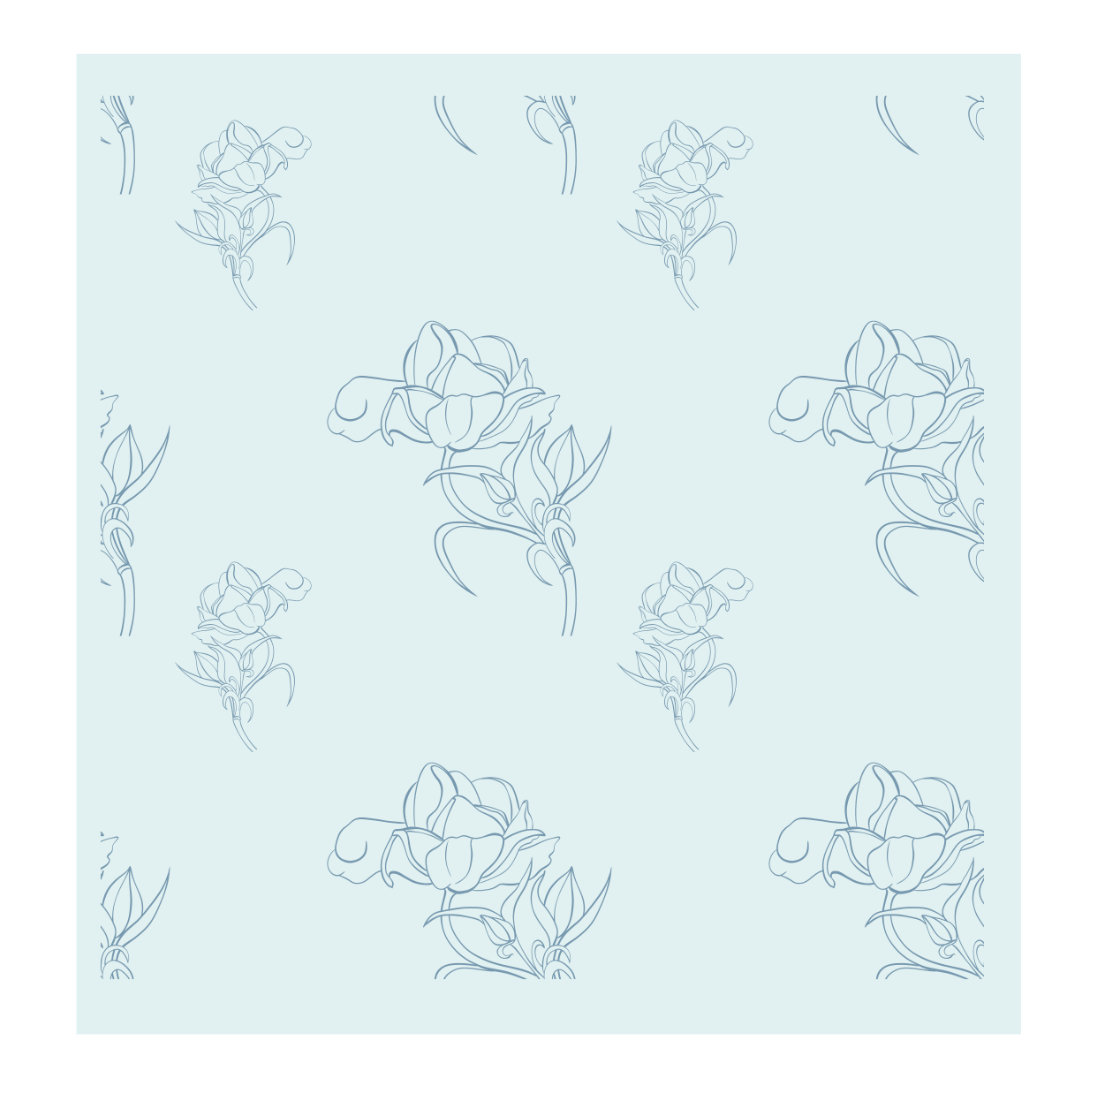 Drawing of a bunch of flowers on a blue background.